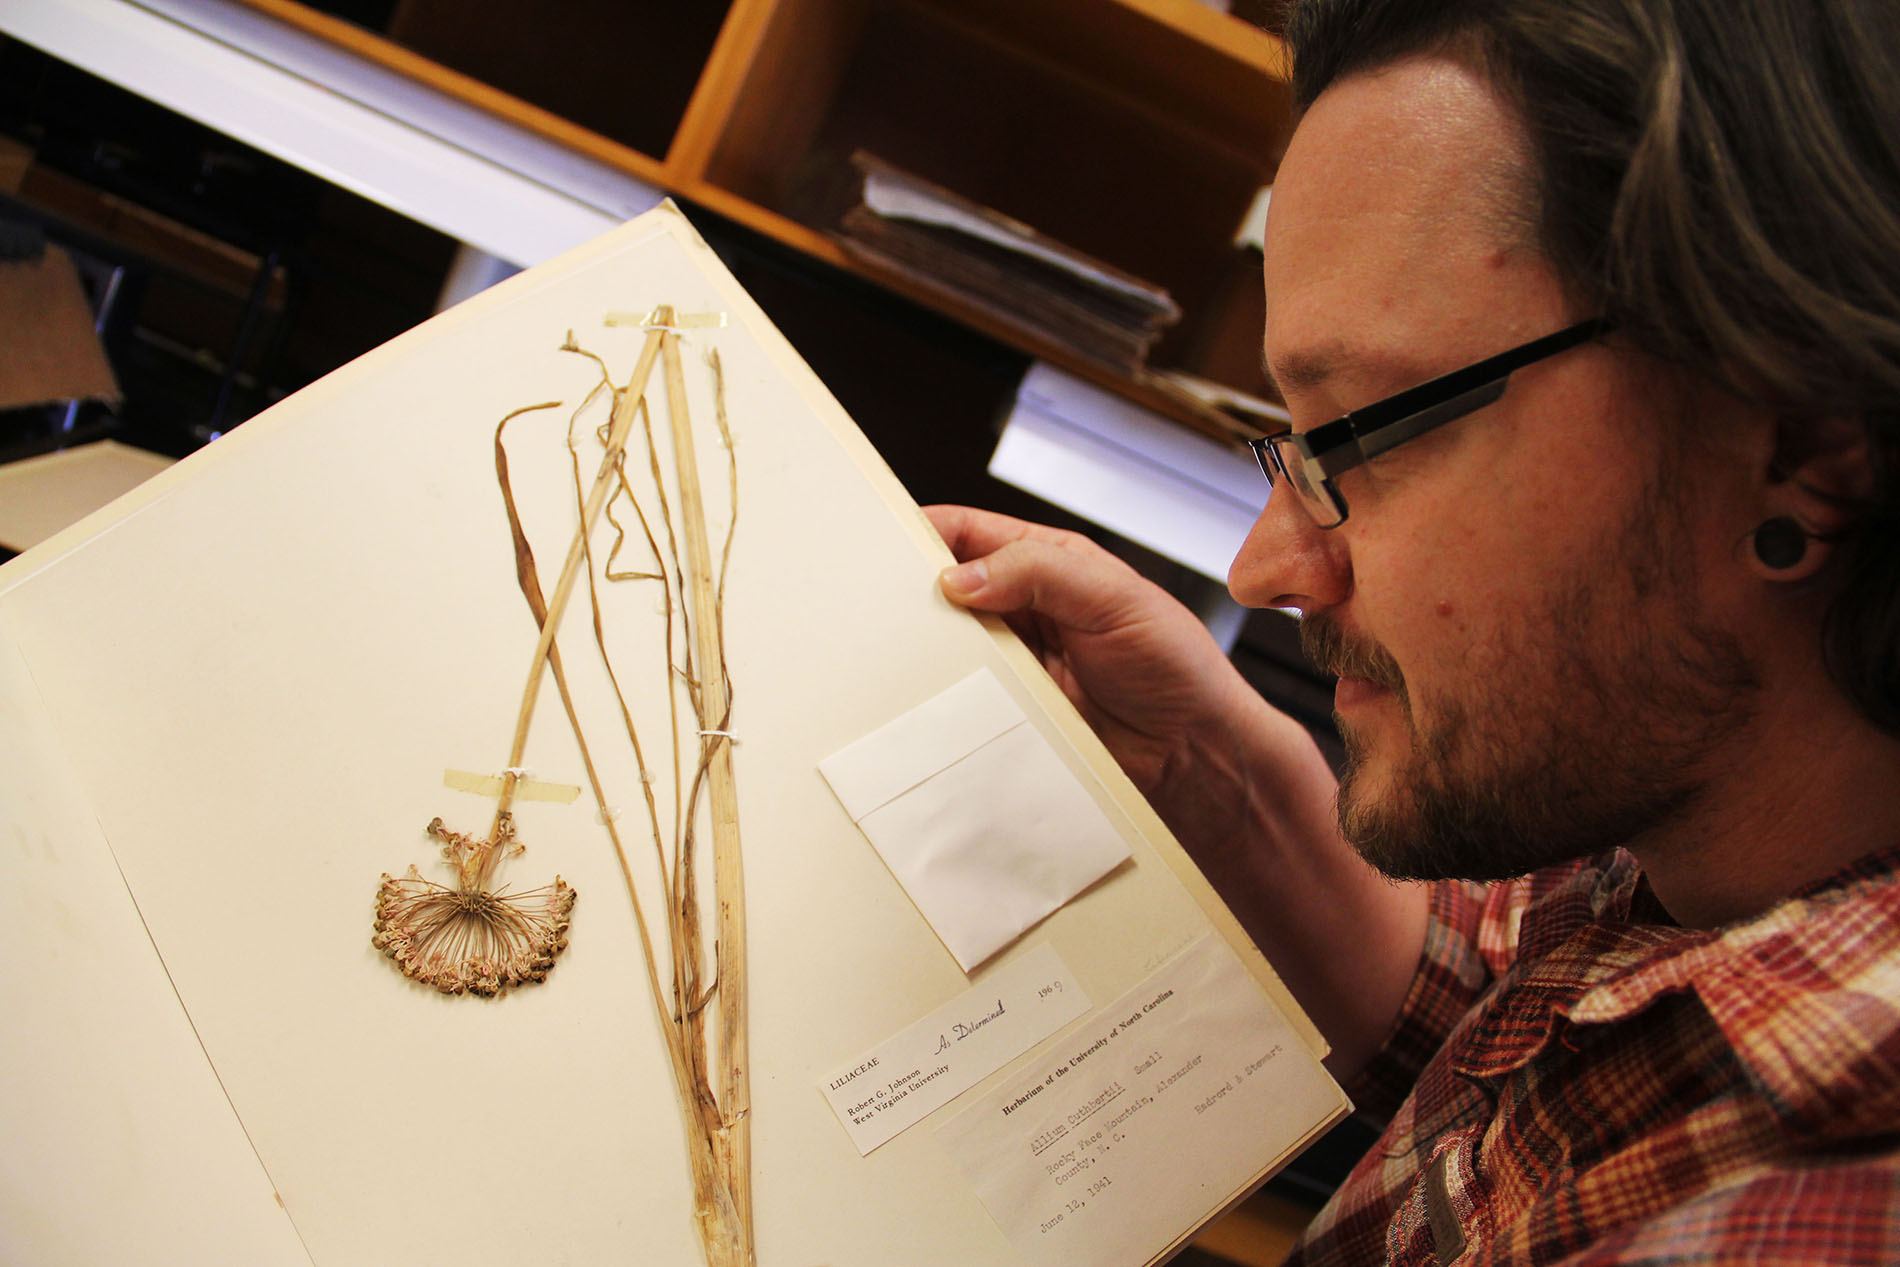 UNC PhD student Derick Poindexter observes a specimen called Keever’s onion, a new species he and UNC Herbarium Director Alan Weakley recently studied and published information on in the Journal of the Botanical Research Institute of Texas. (photo courtesy of Endeavors)